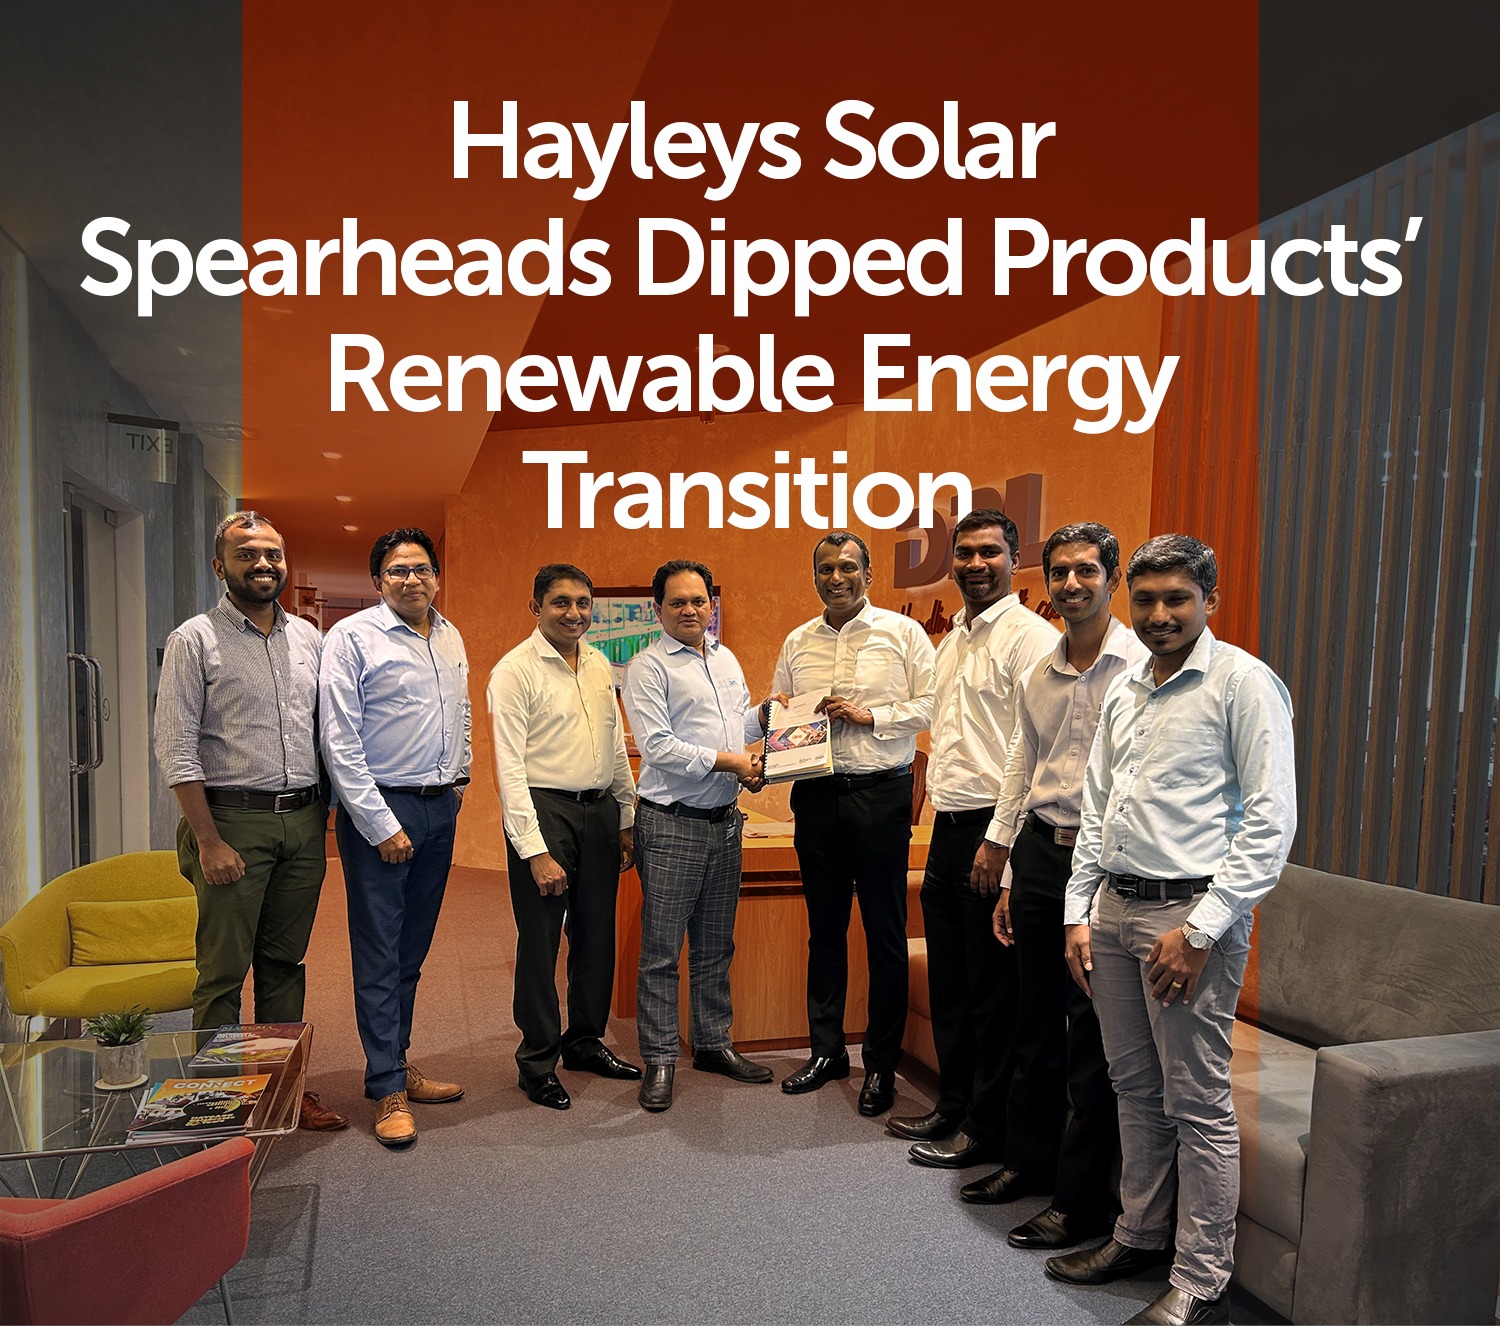 Hayleys Solar partners with Dipped Products PLC